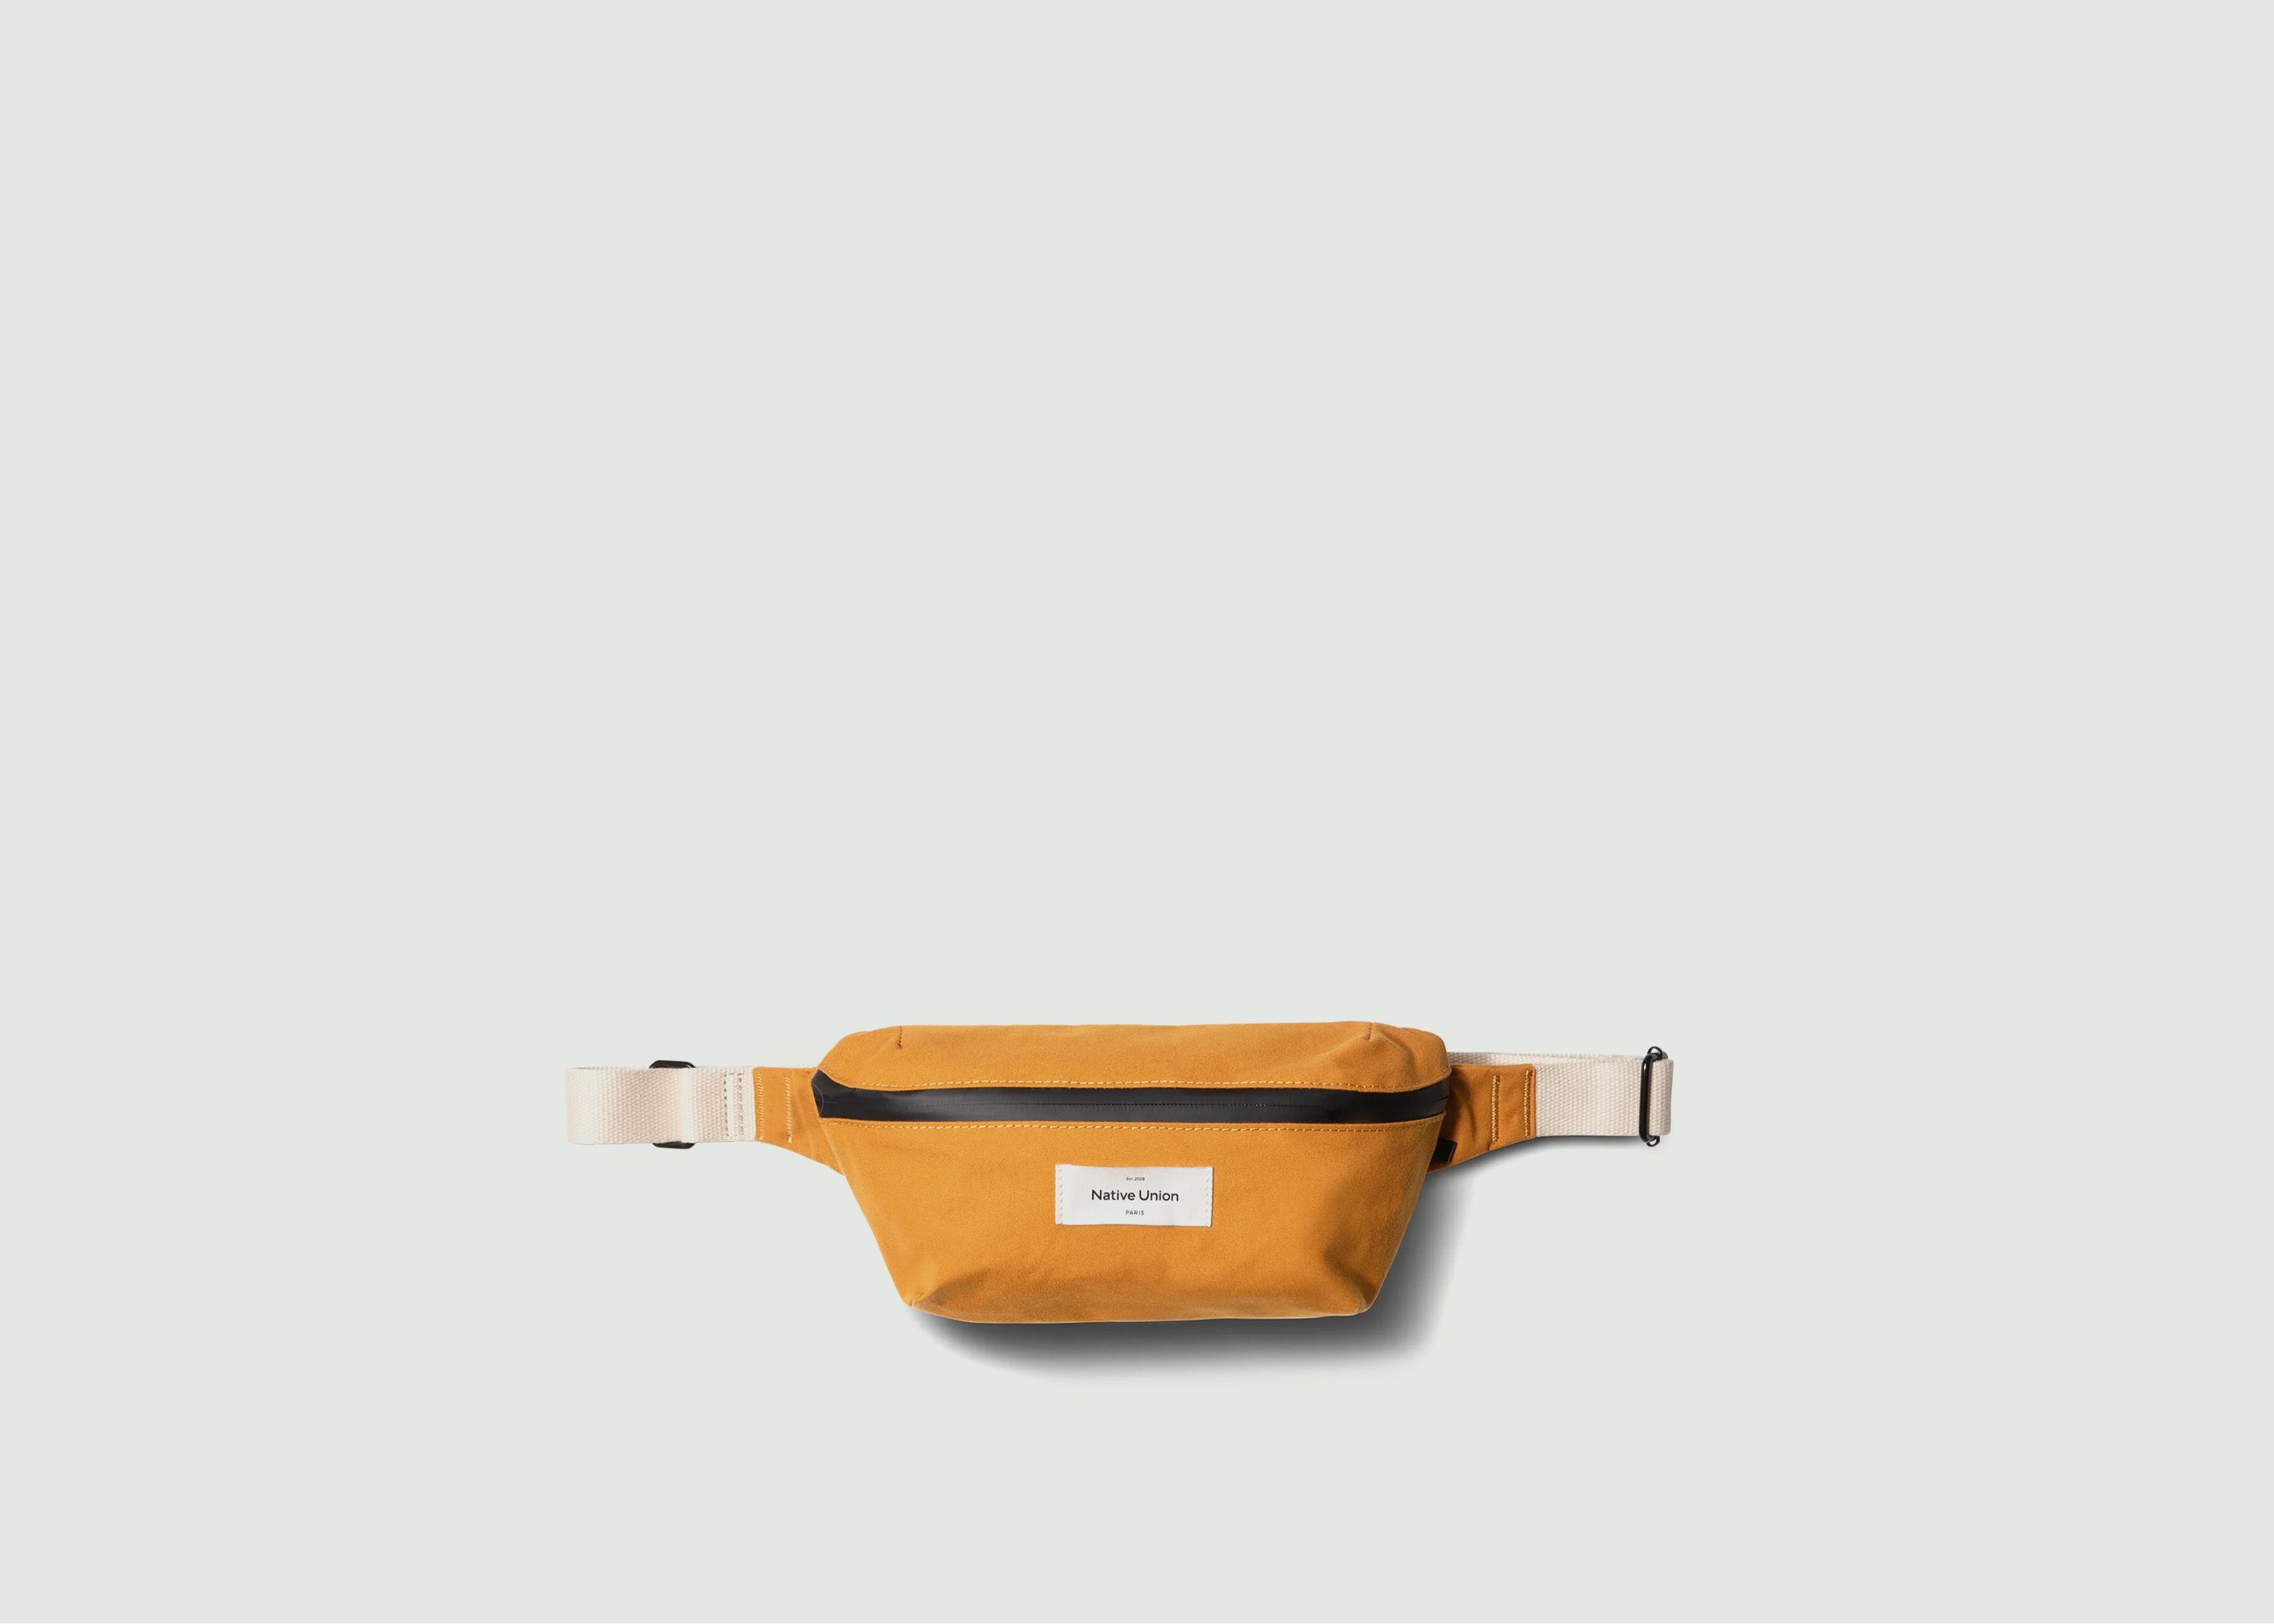 W.F.A Pouch Fanny Pack - Native Union